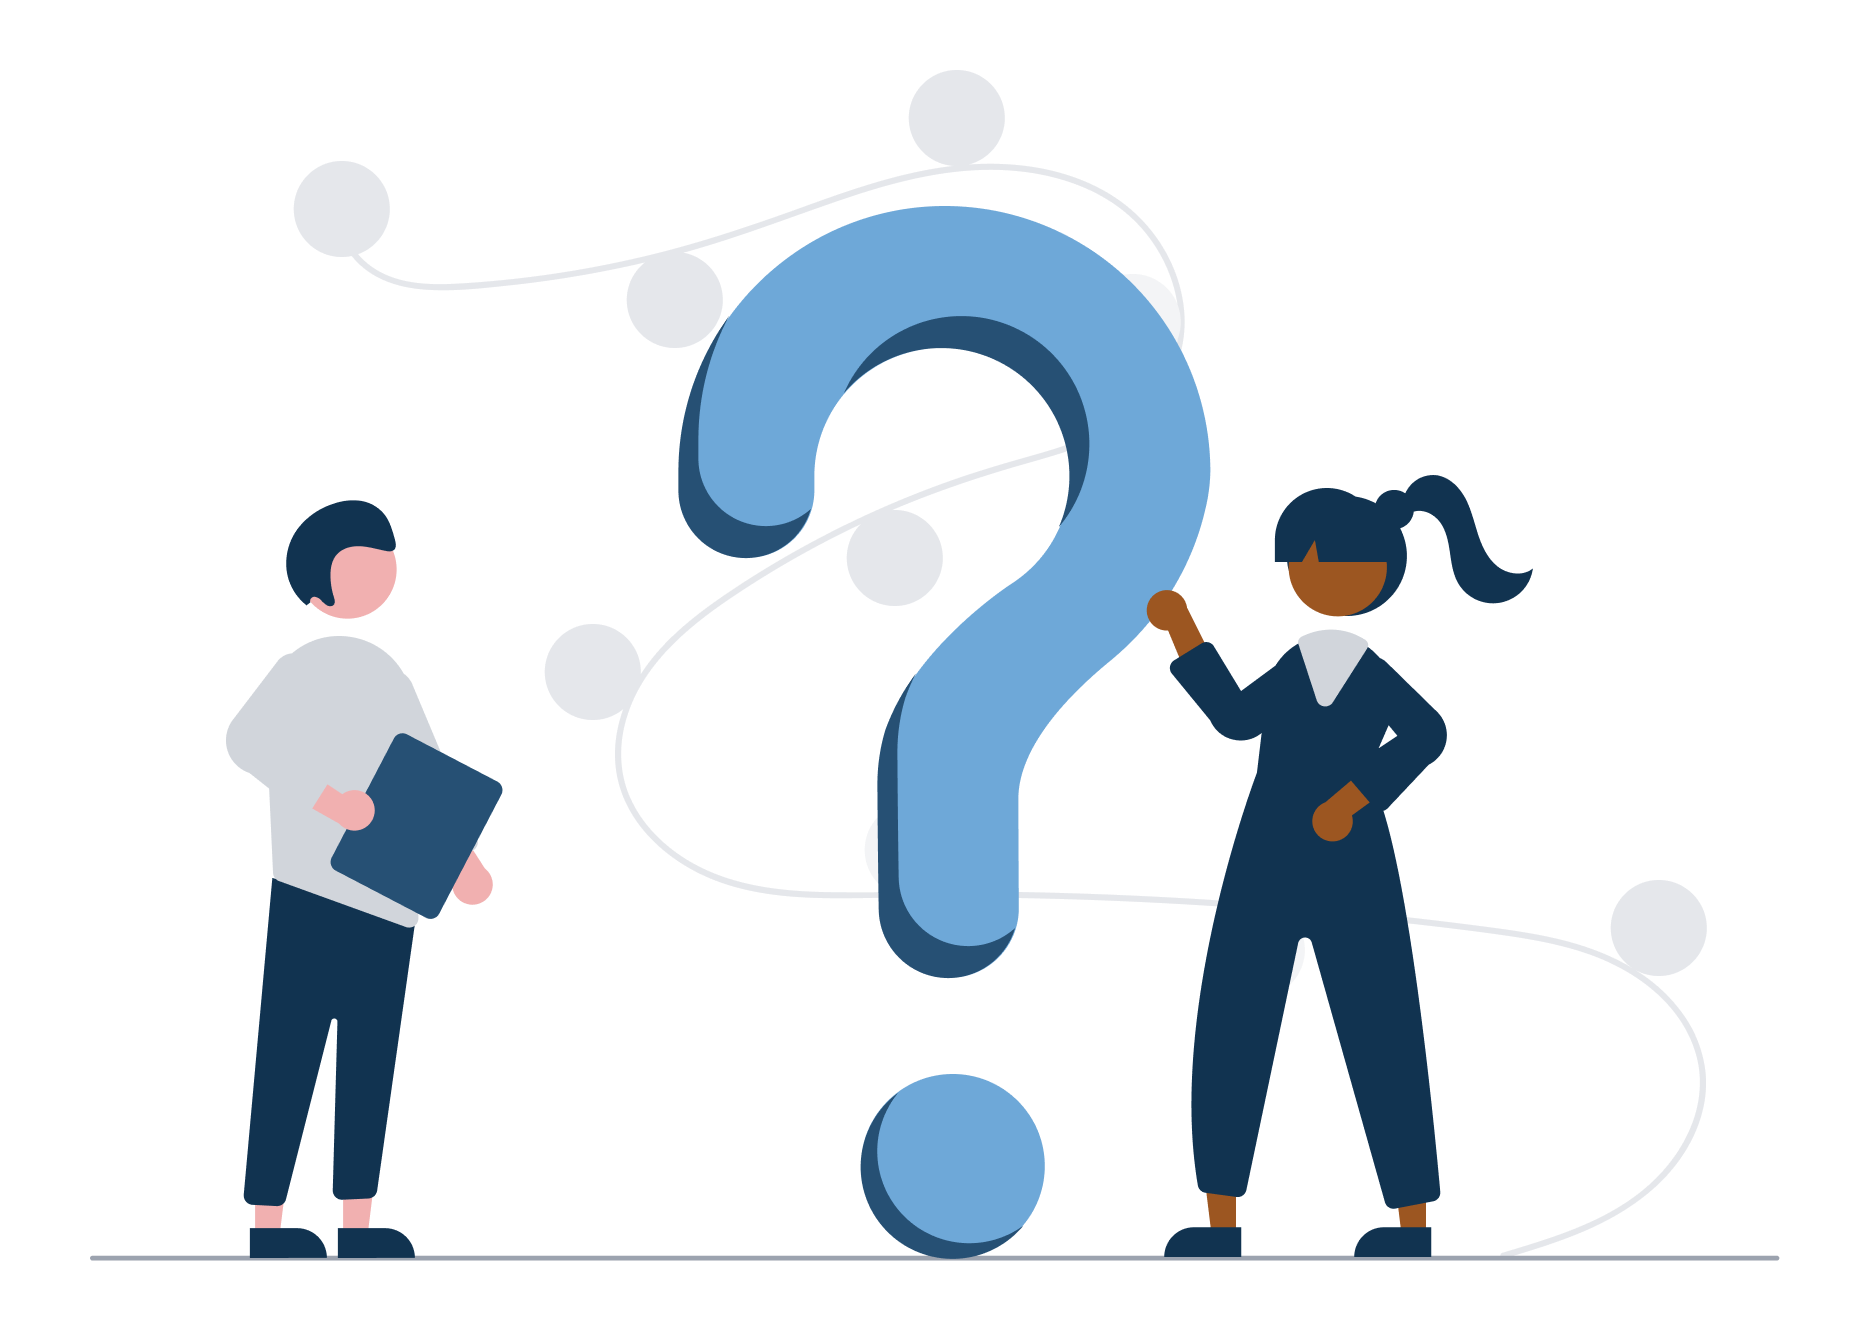 Illustration of a question mark with two figures on either side